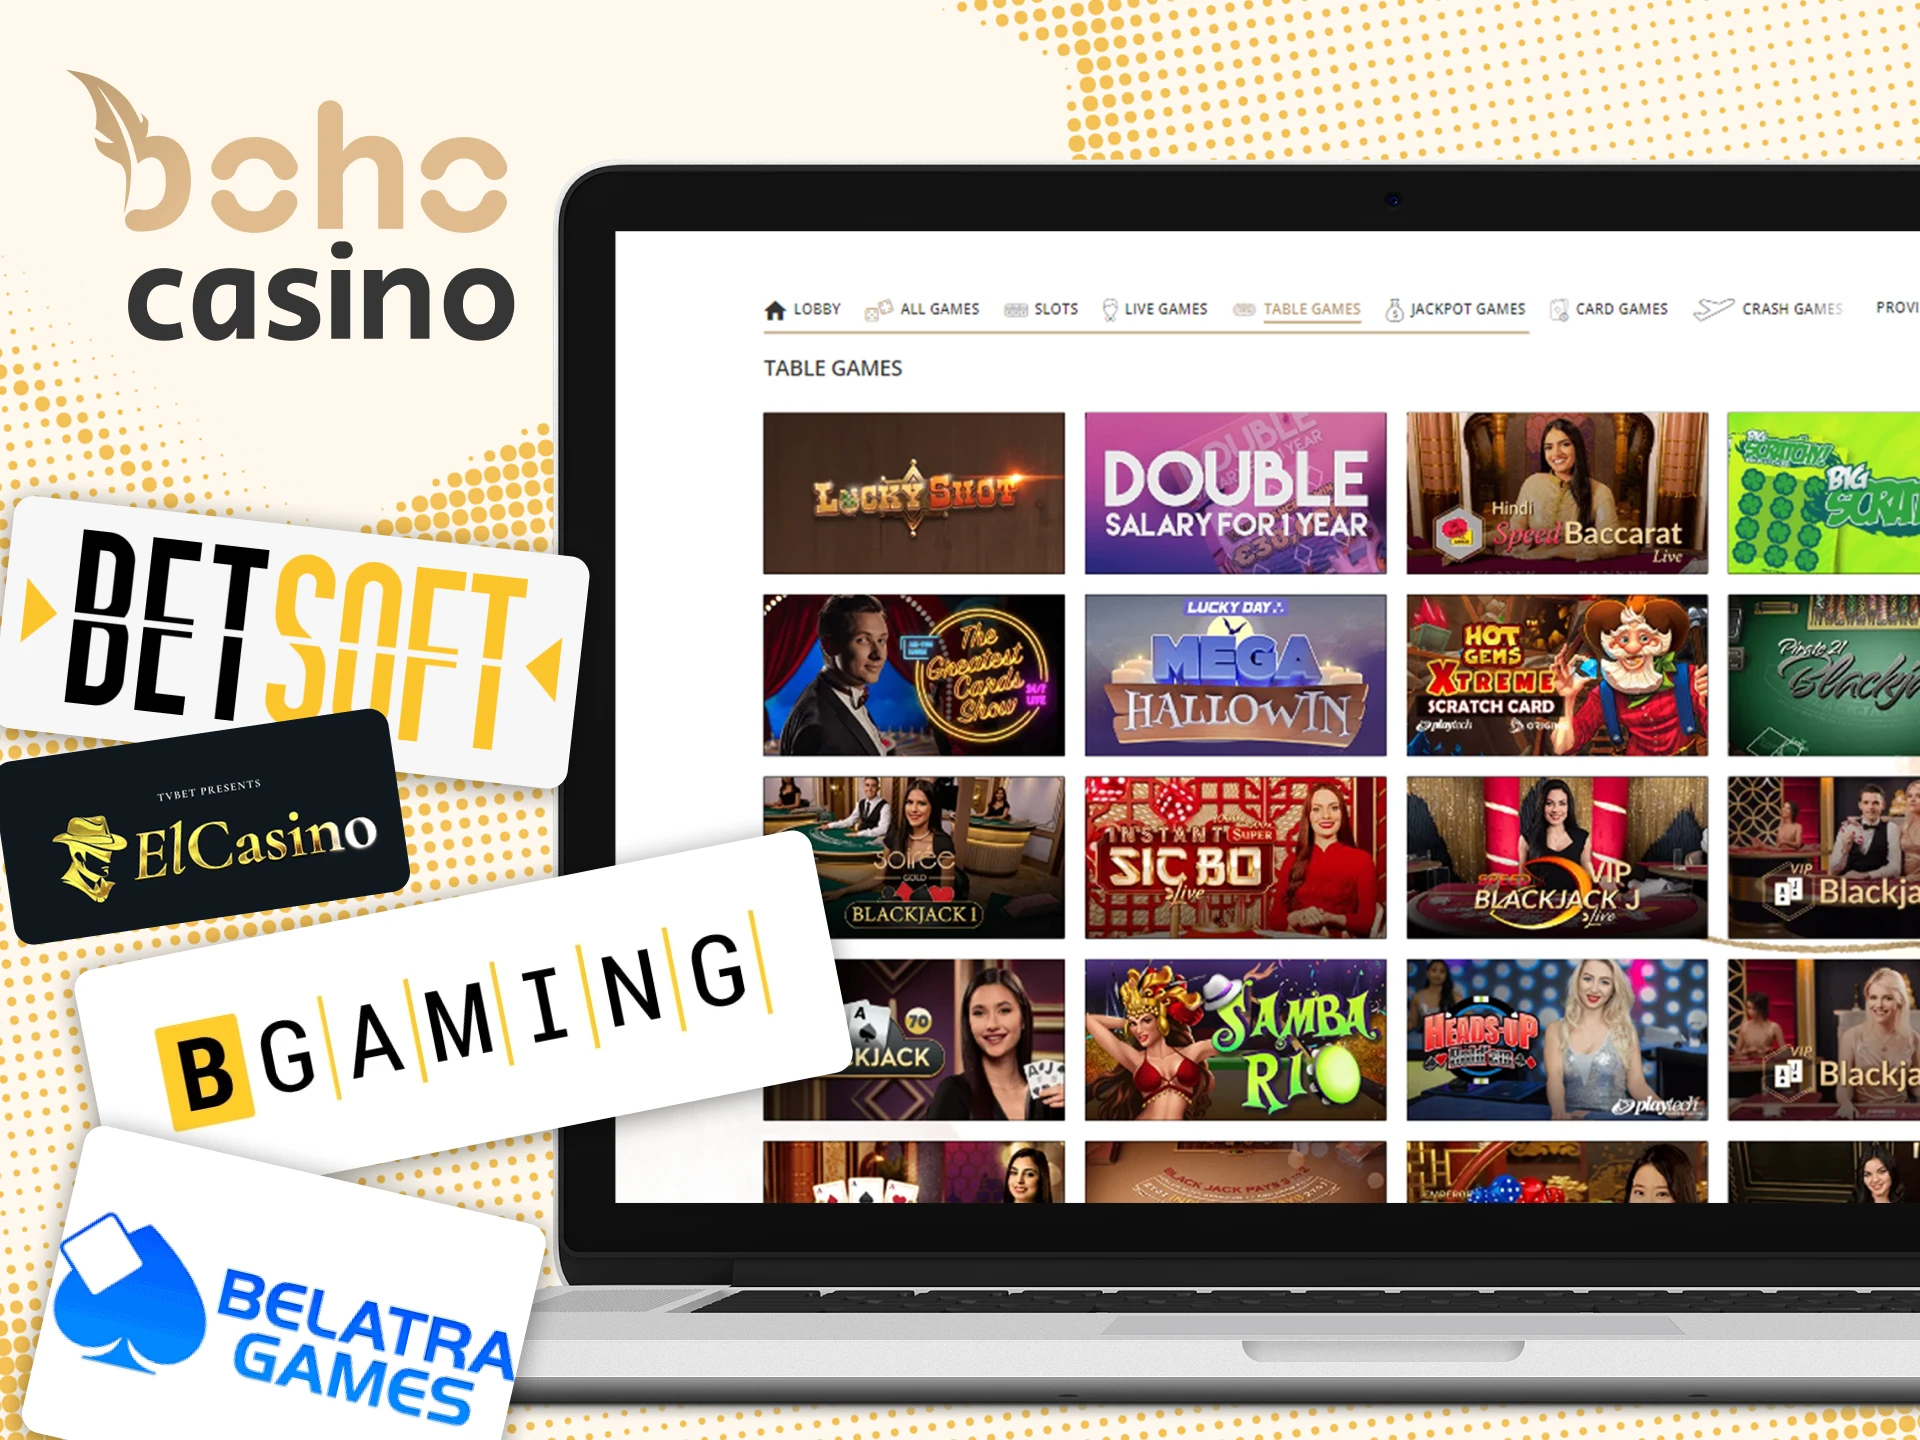 Boho Casino has partnered with the best and reliable table games providers.